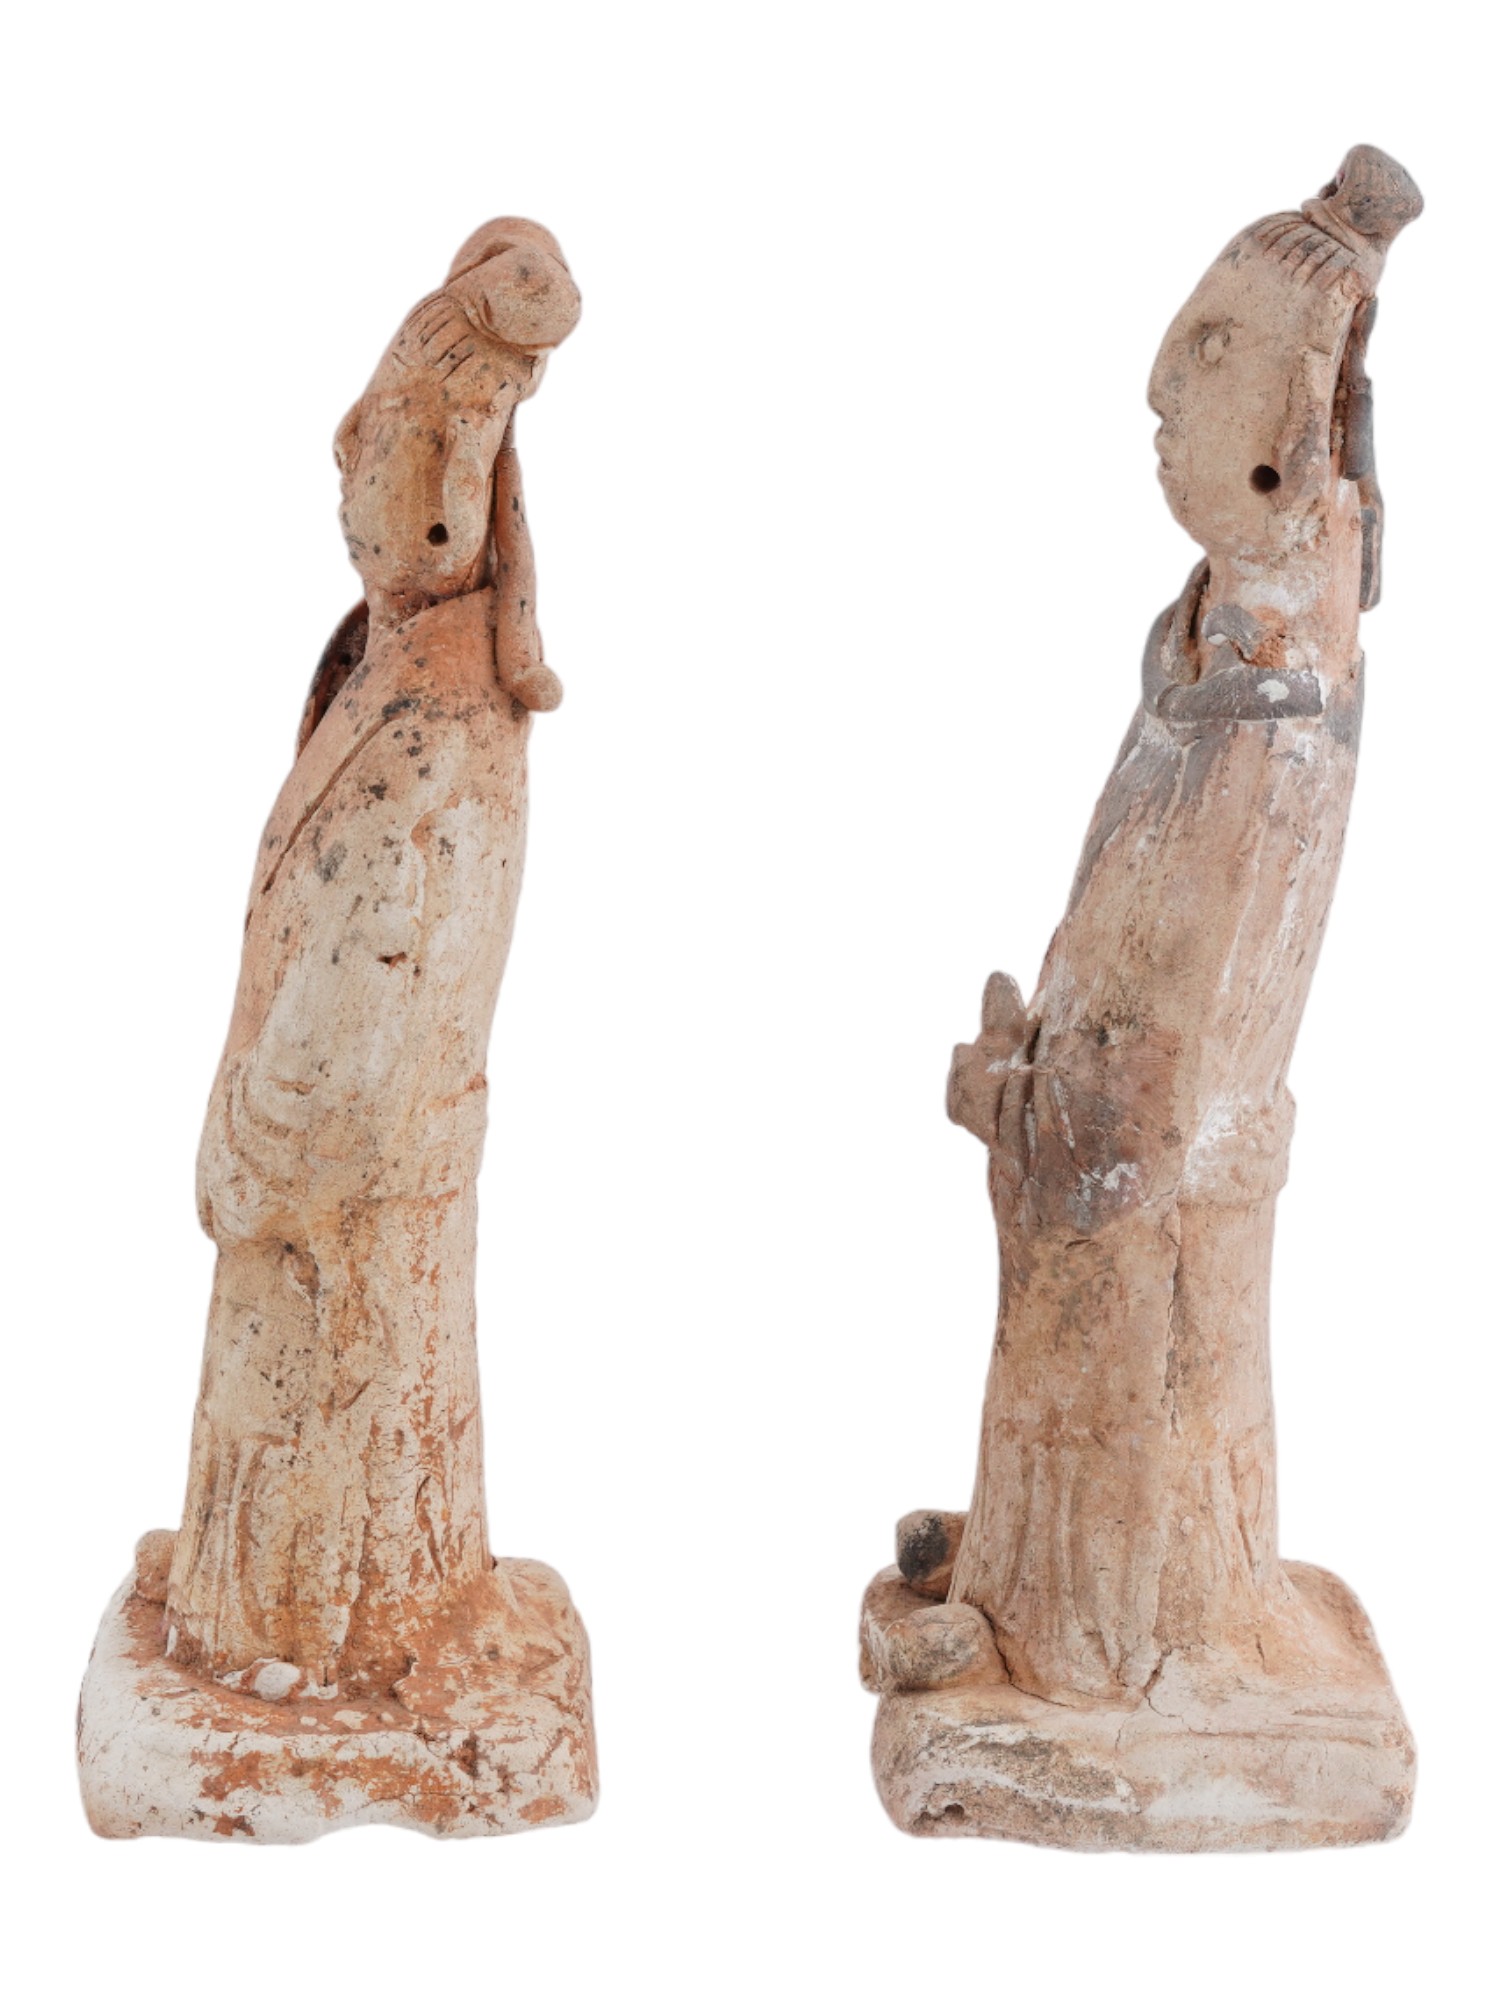 ANTIQUE CHINESE SONG DYNASTY TERRACOTTA FIGURINES PIC-2